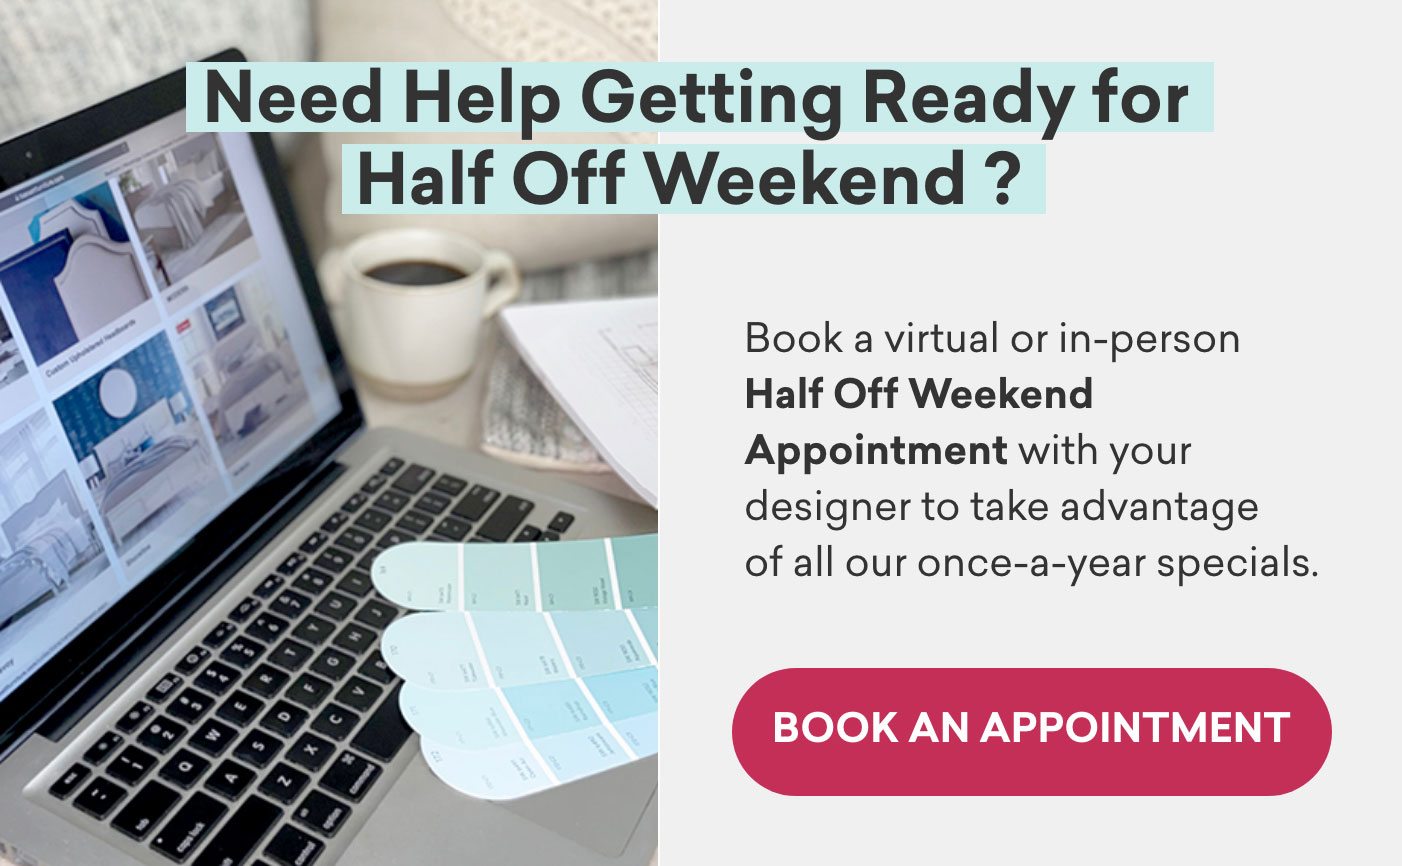 Need help getting ready for Half Off Weekend? Book an appointment.